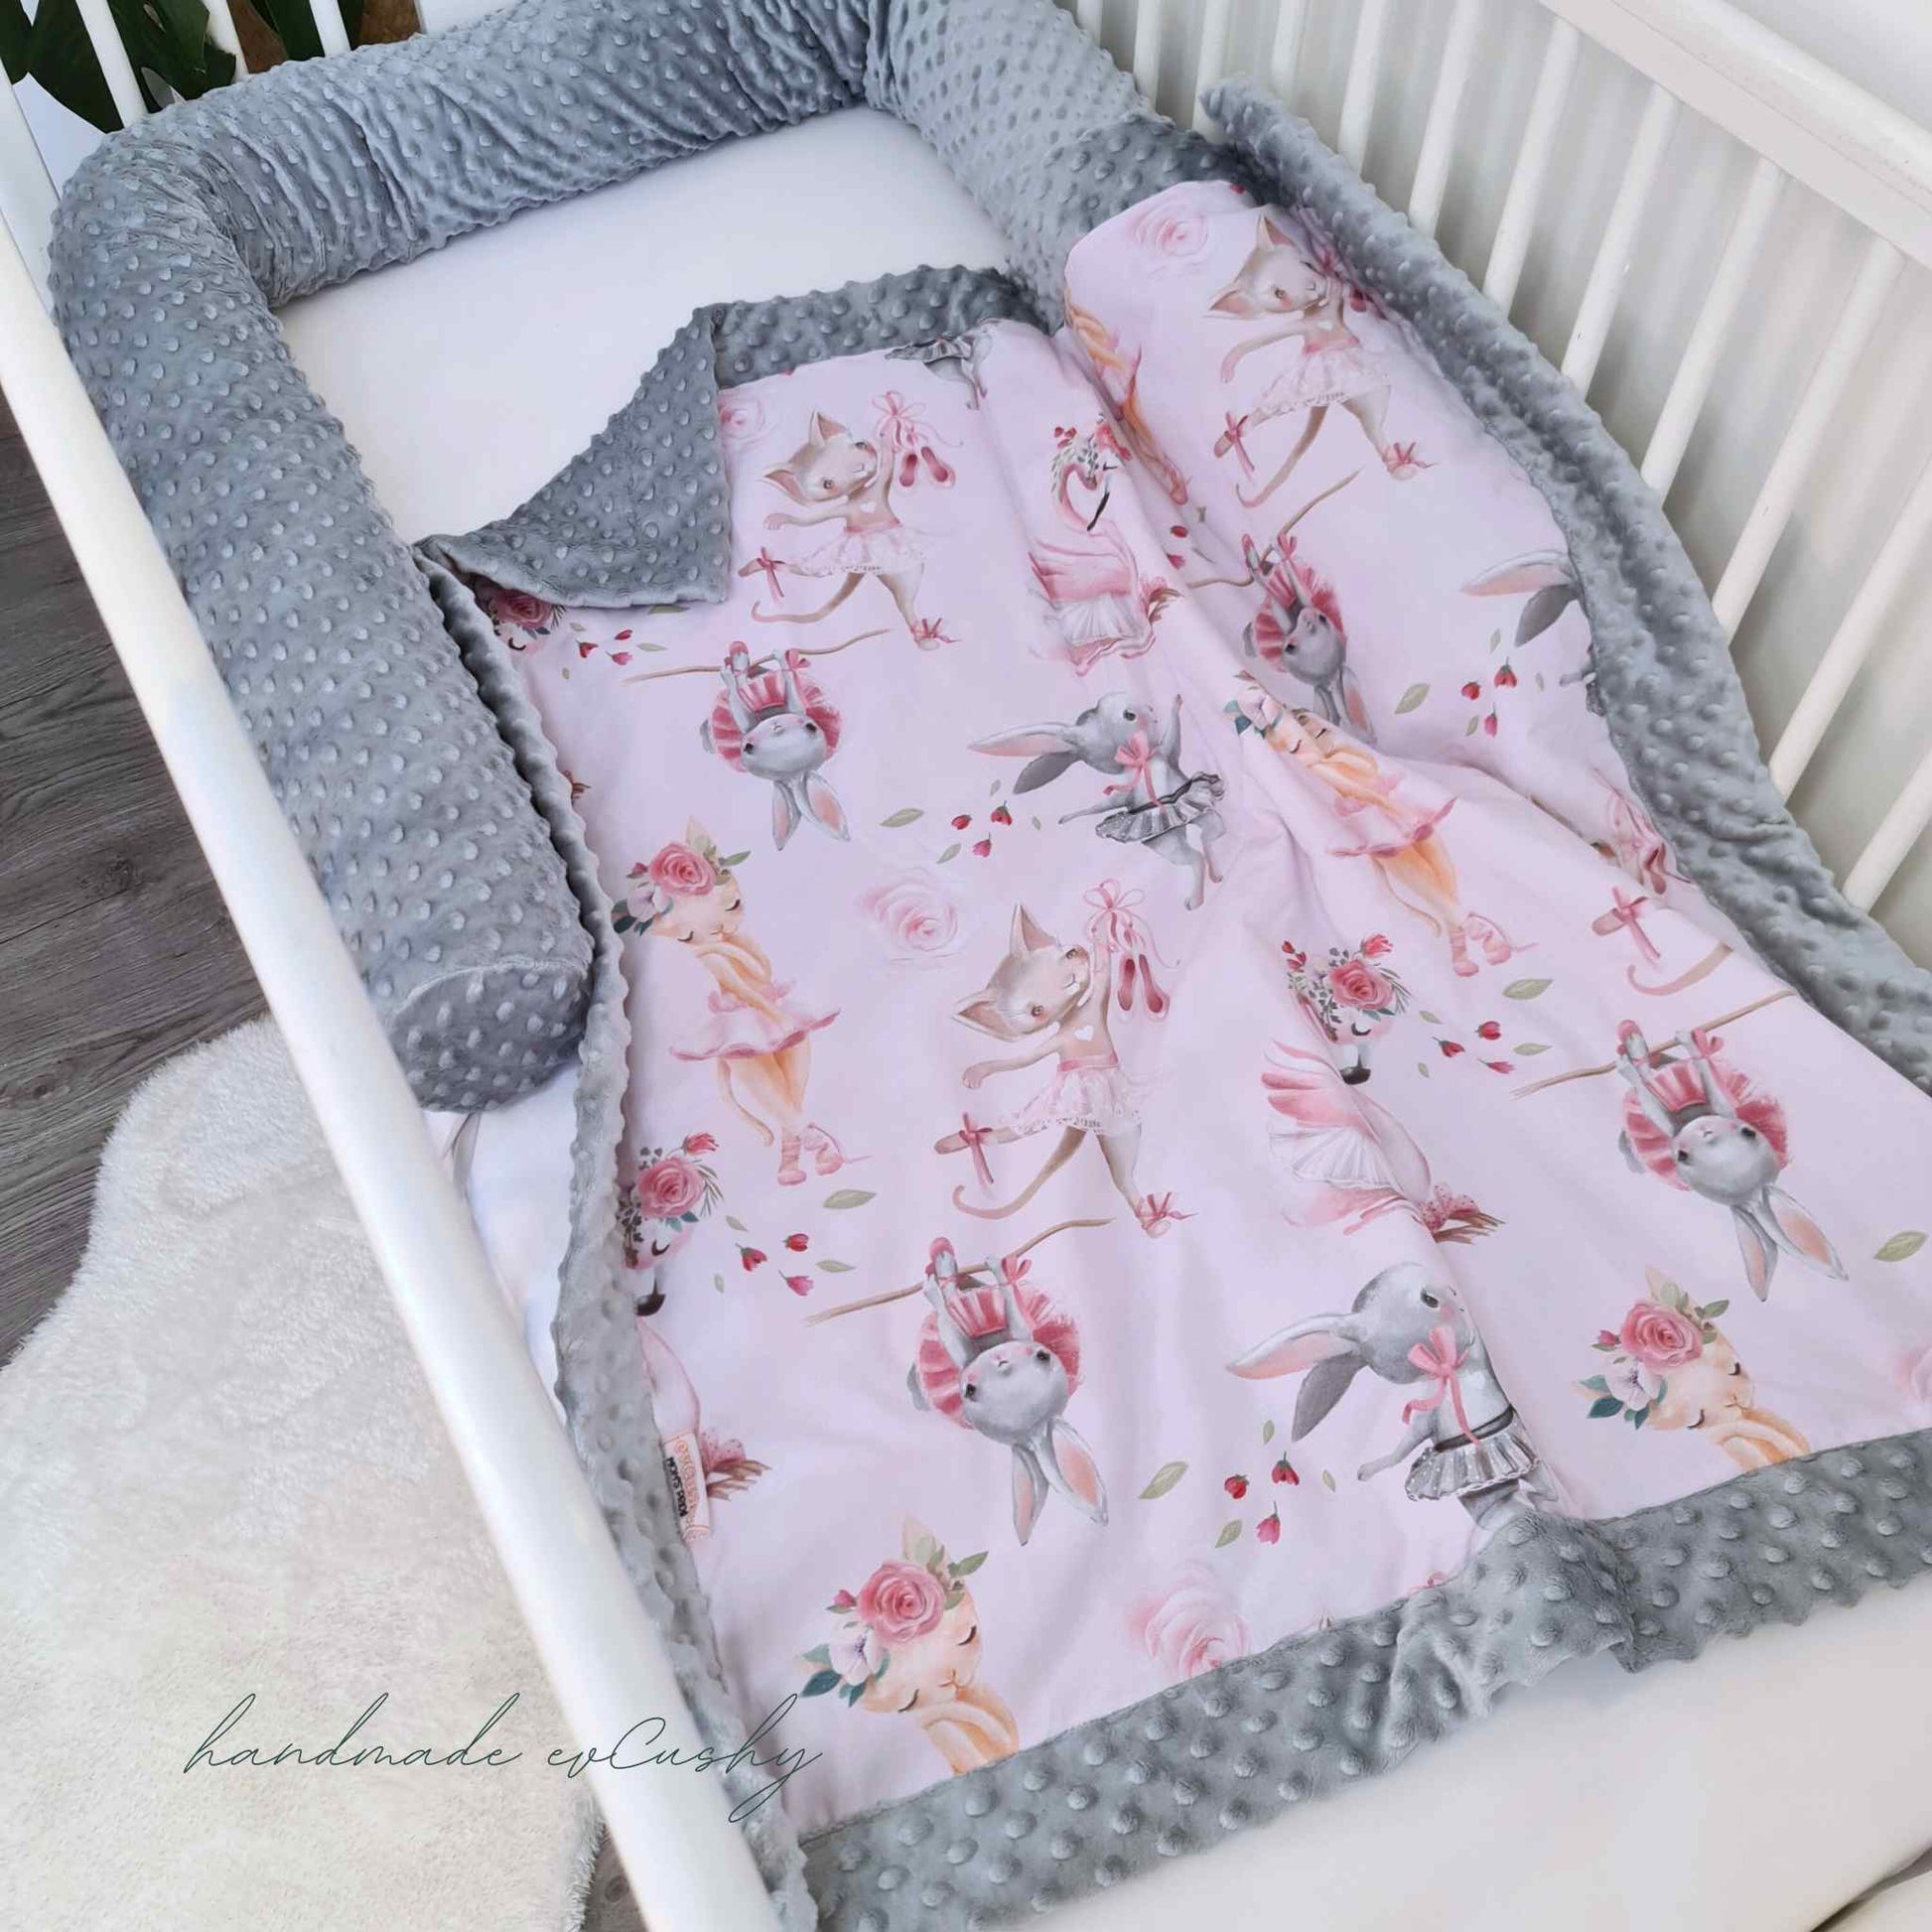 blanket for baby girl pink and grey cosy blanket breathable cotton evcushy